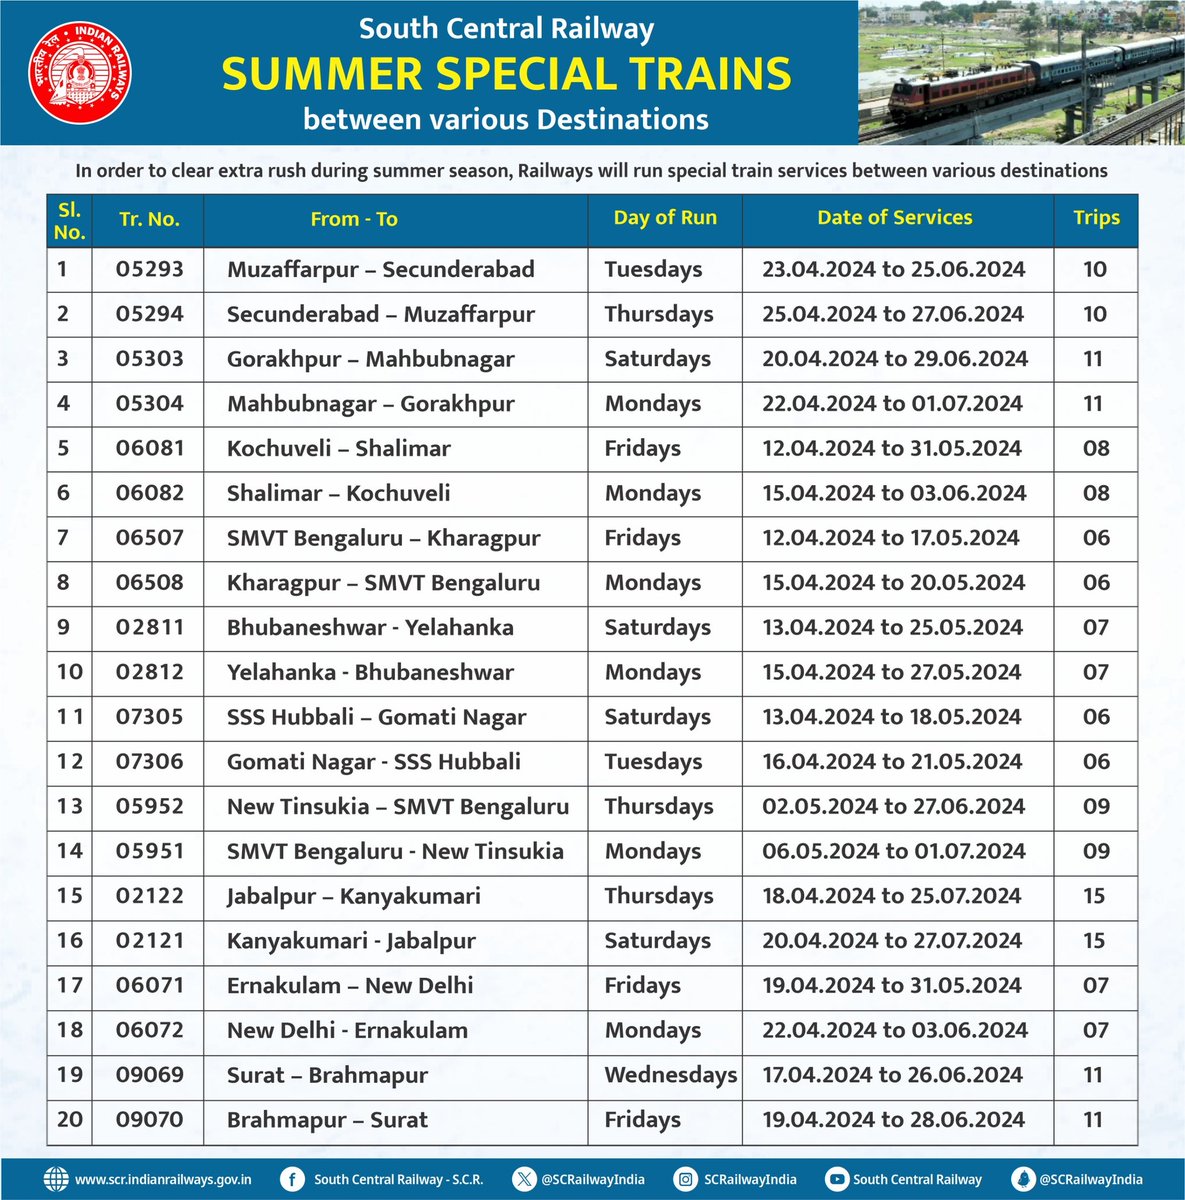 #Summer #SpecialTrains between various destinations to clear extra rush of passengers